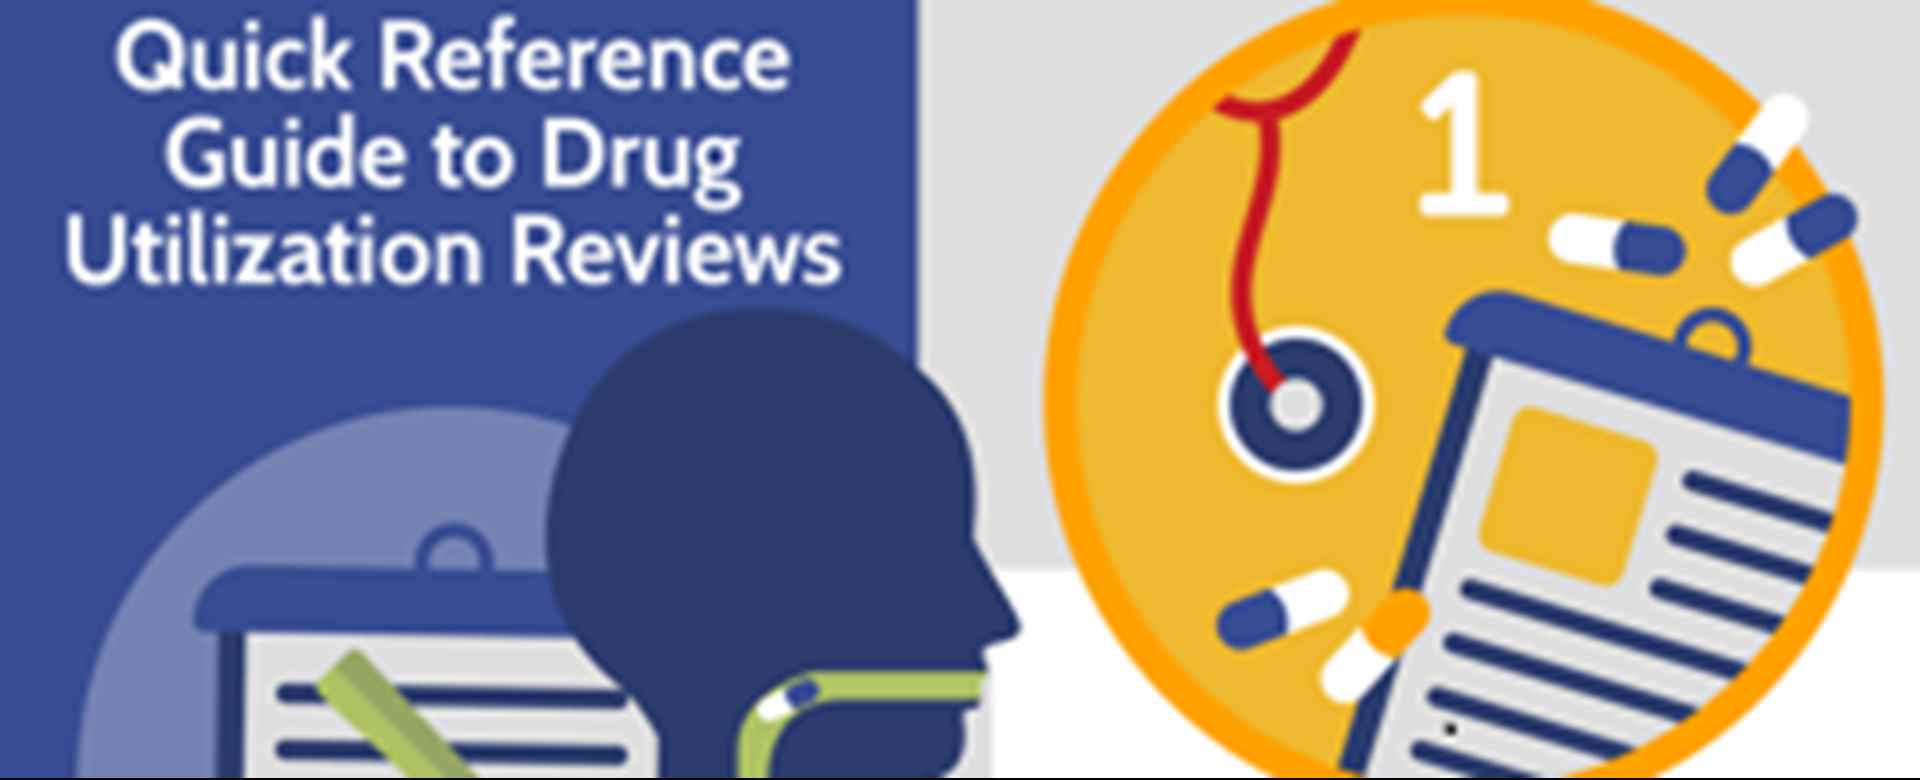 Quick Reference Guide to Drug Utilization Reviews [Infographic]